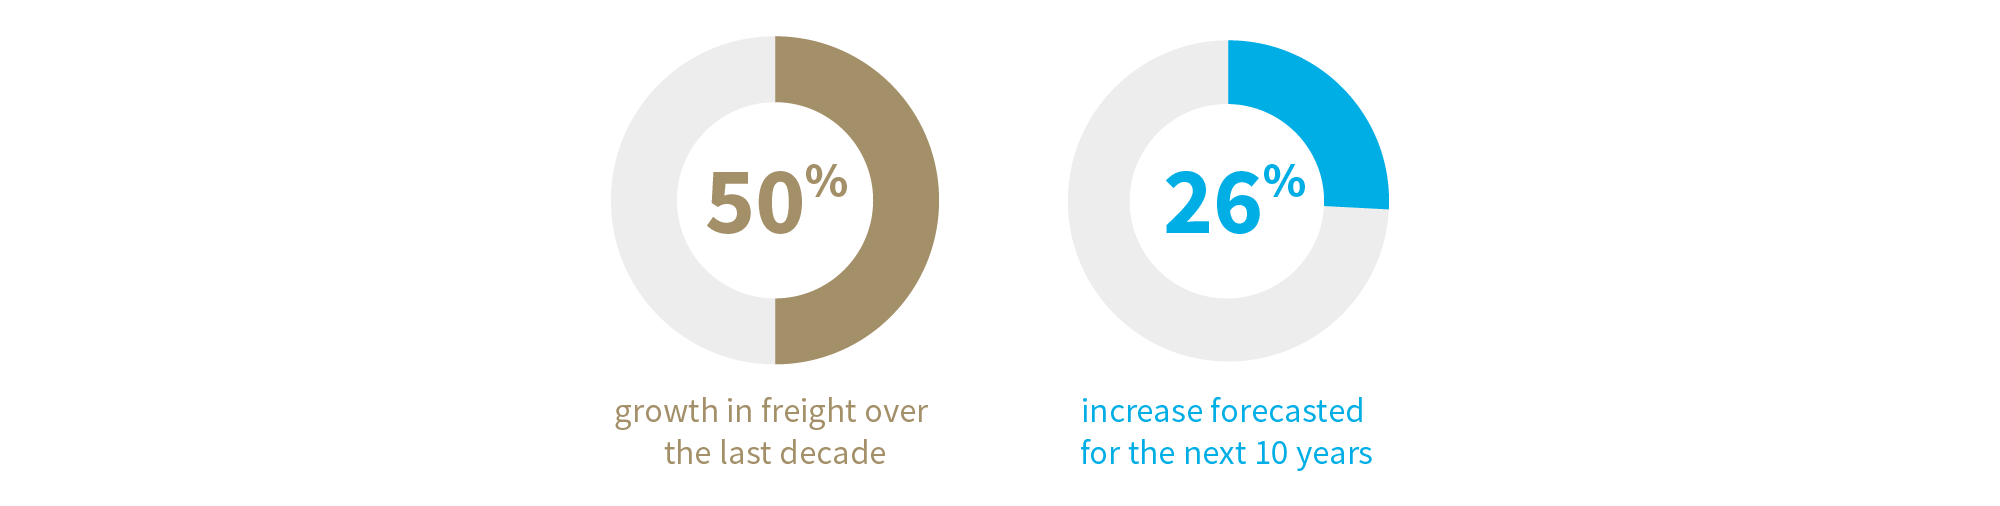 50% increase in freight 26% forecasted